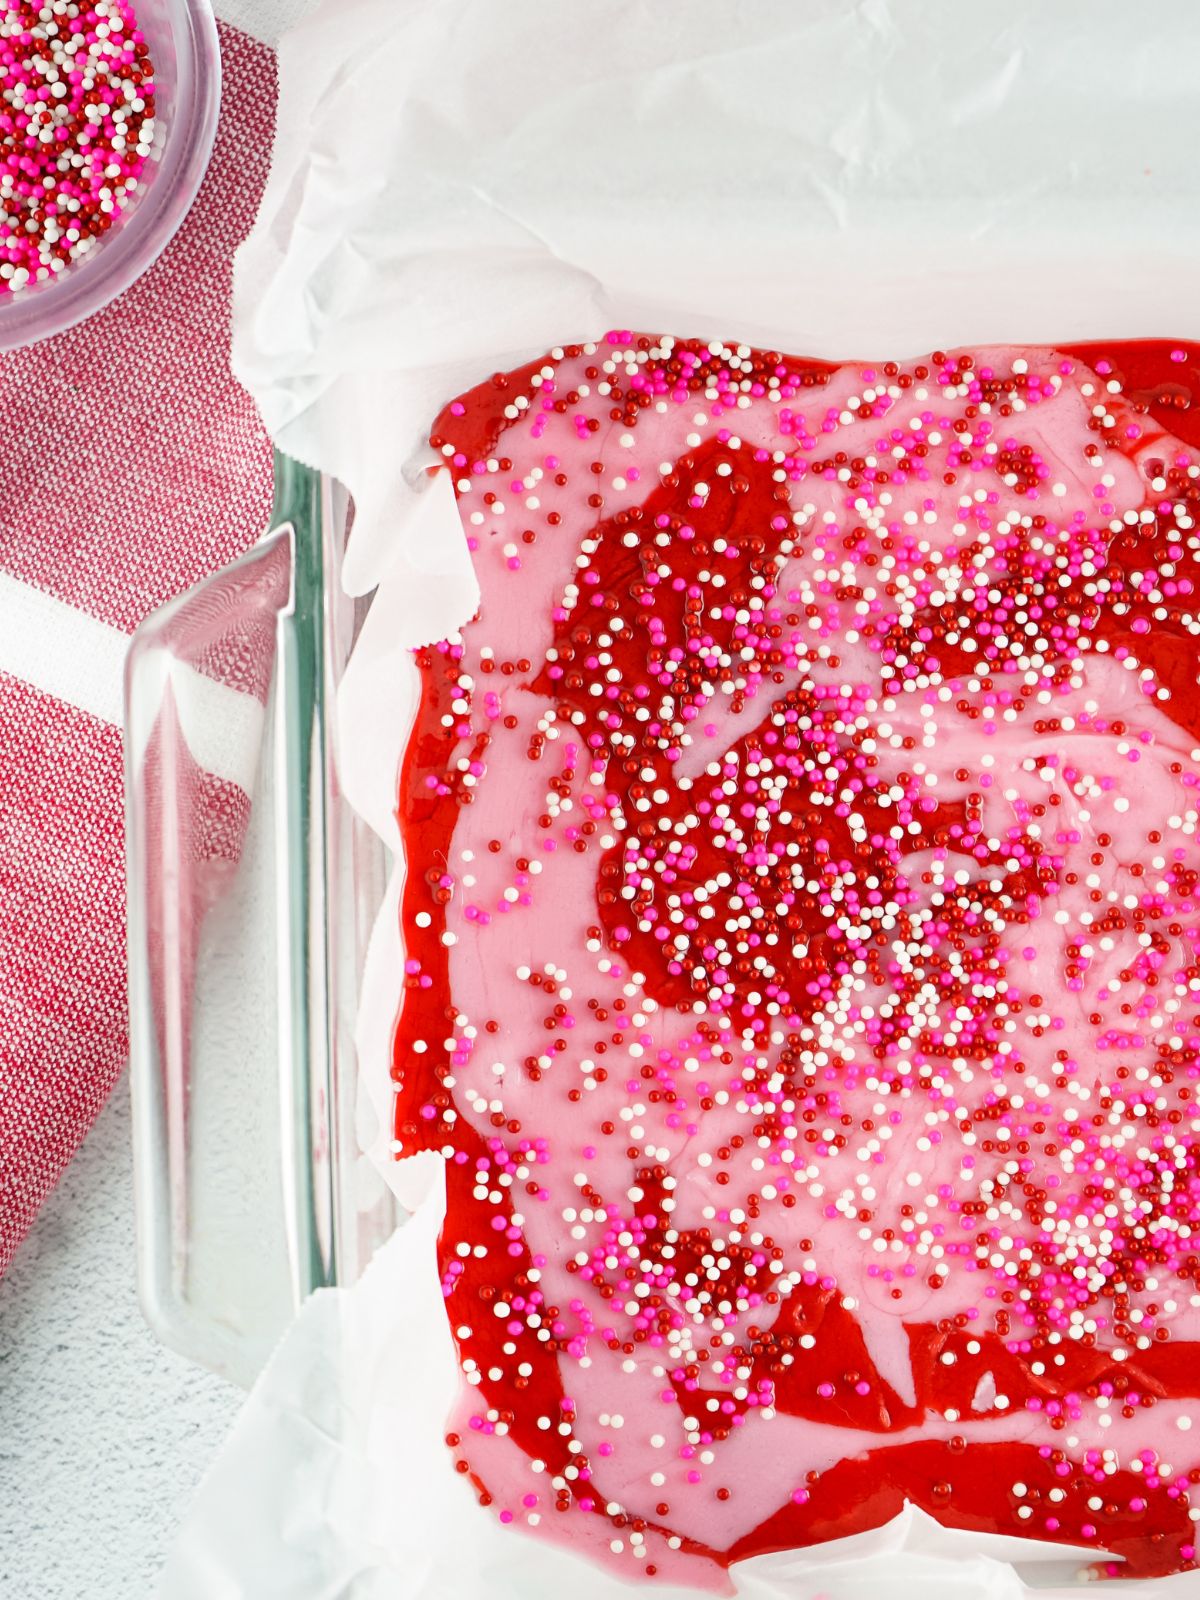 Pink and red fudge swirled together in a pan with sprinkles on top.